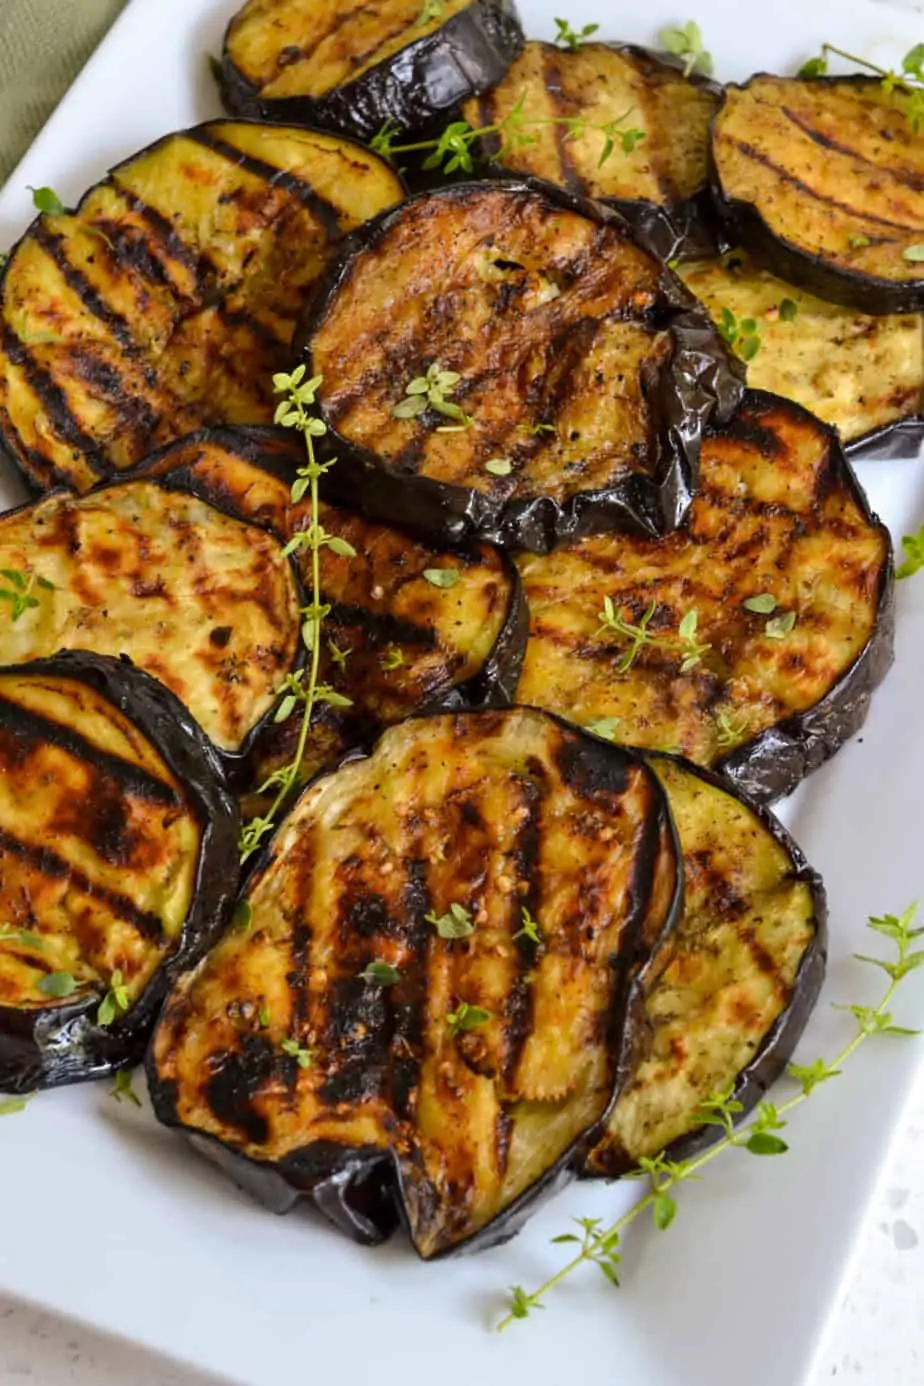 Grilled eggplant on a white plate.